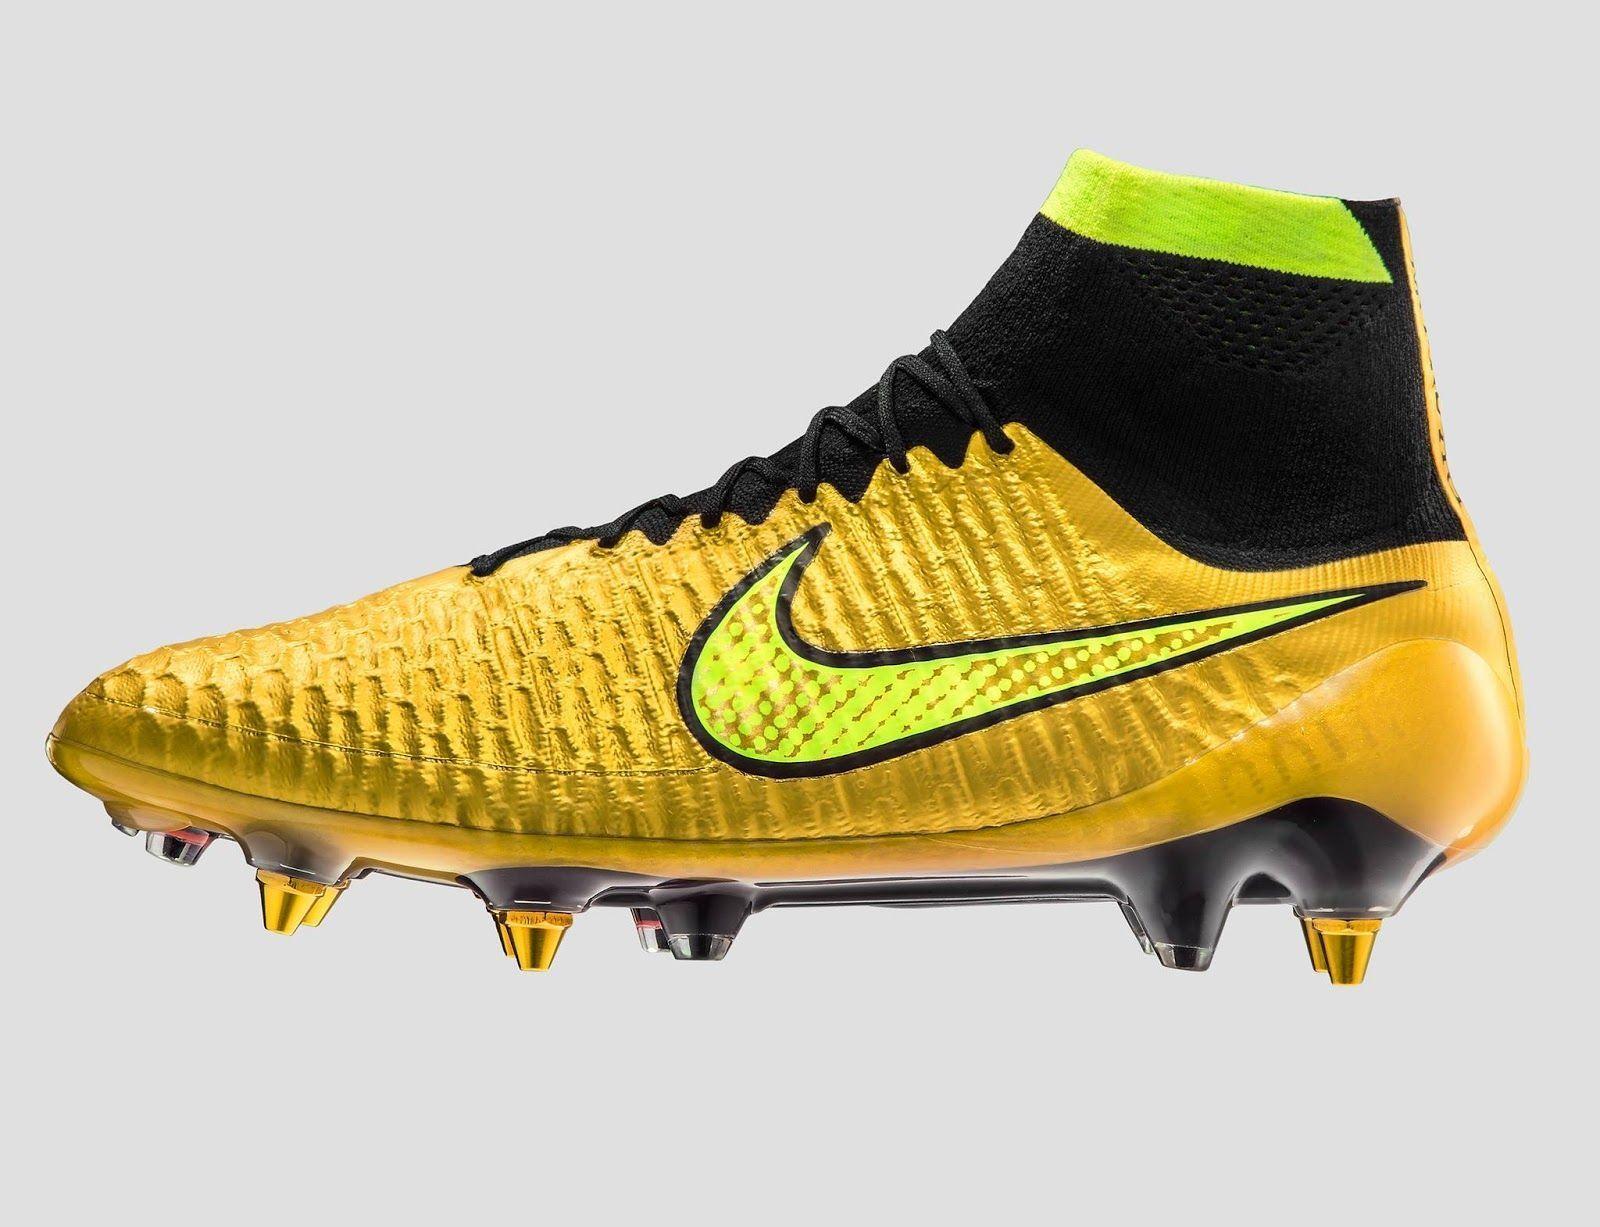 image For > Nike Mercurial Soccer Boots 2015